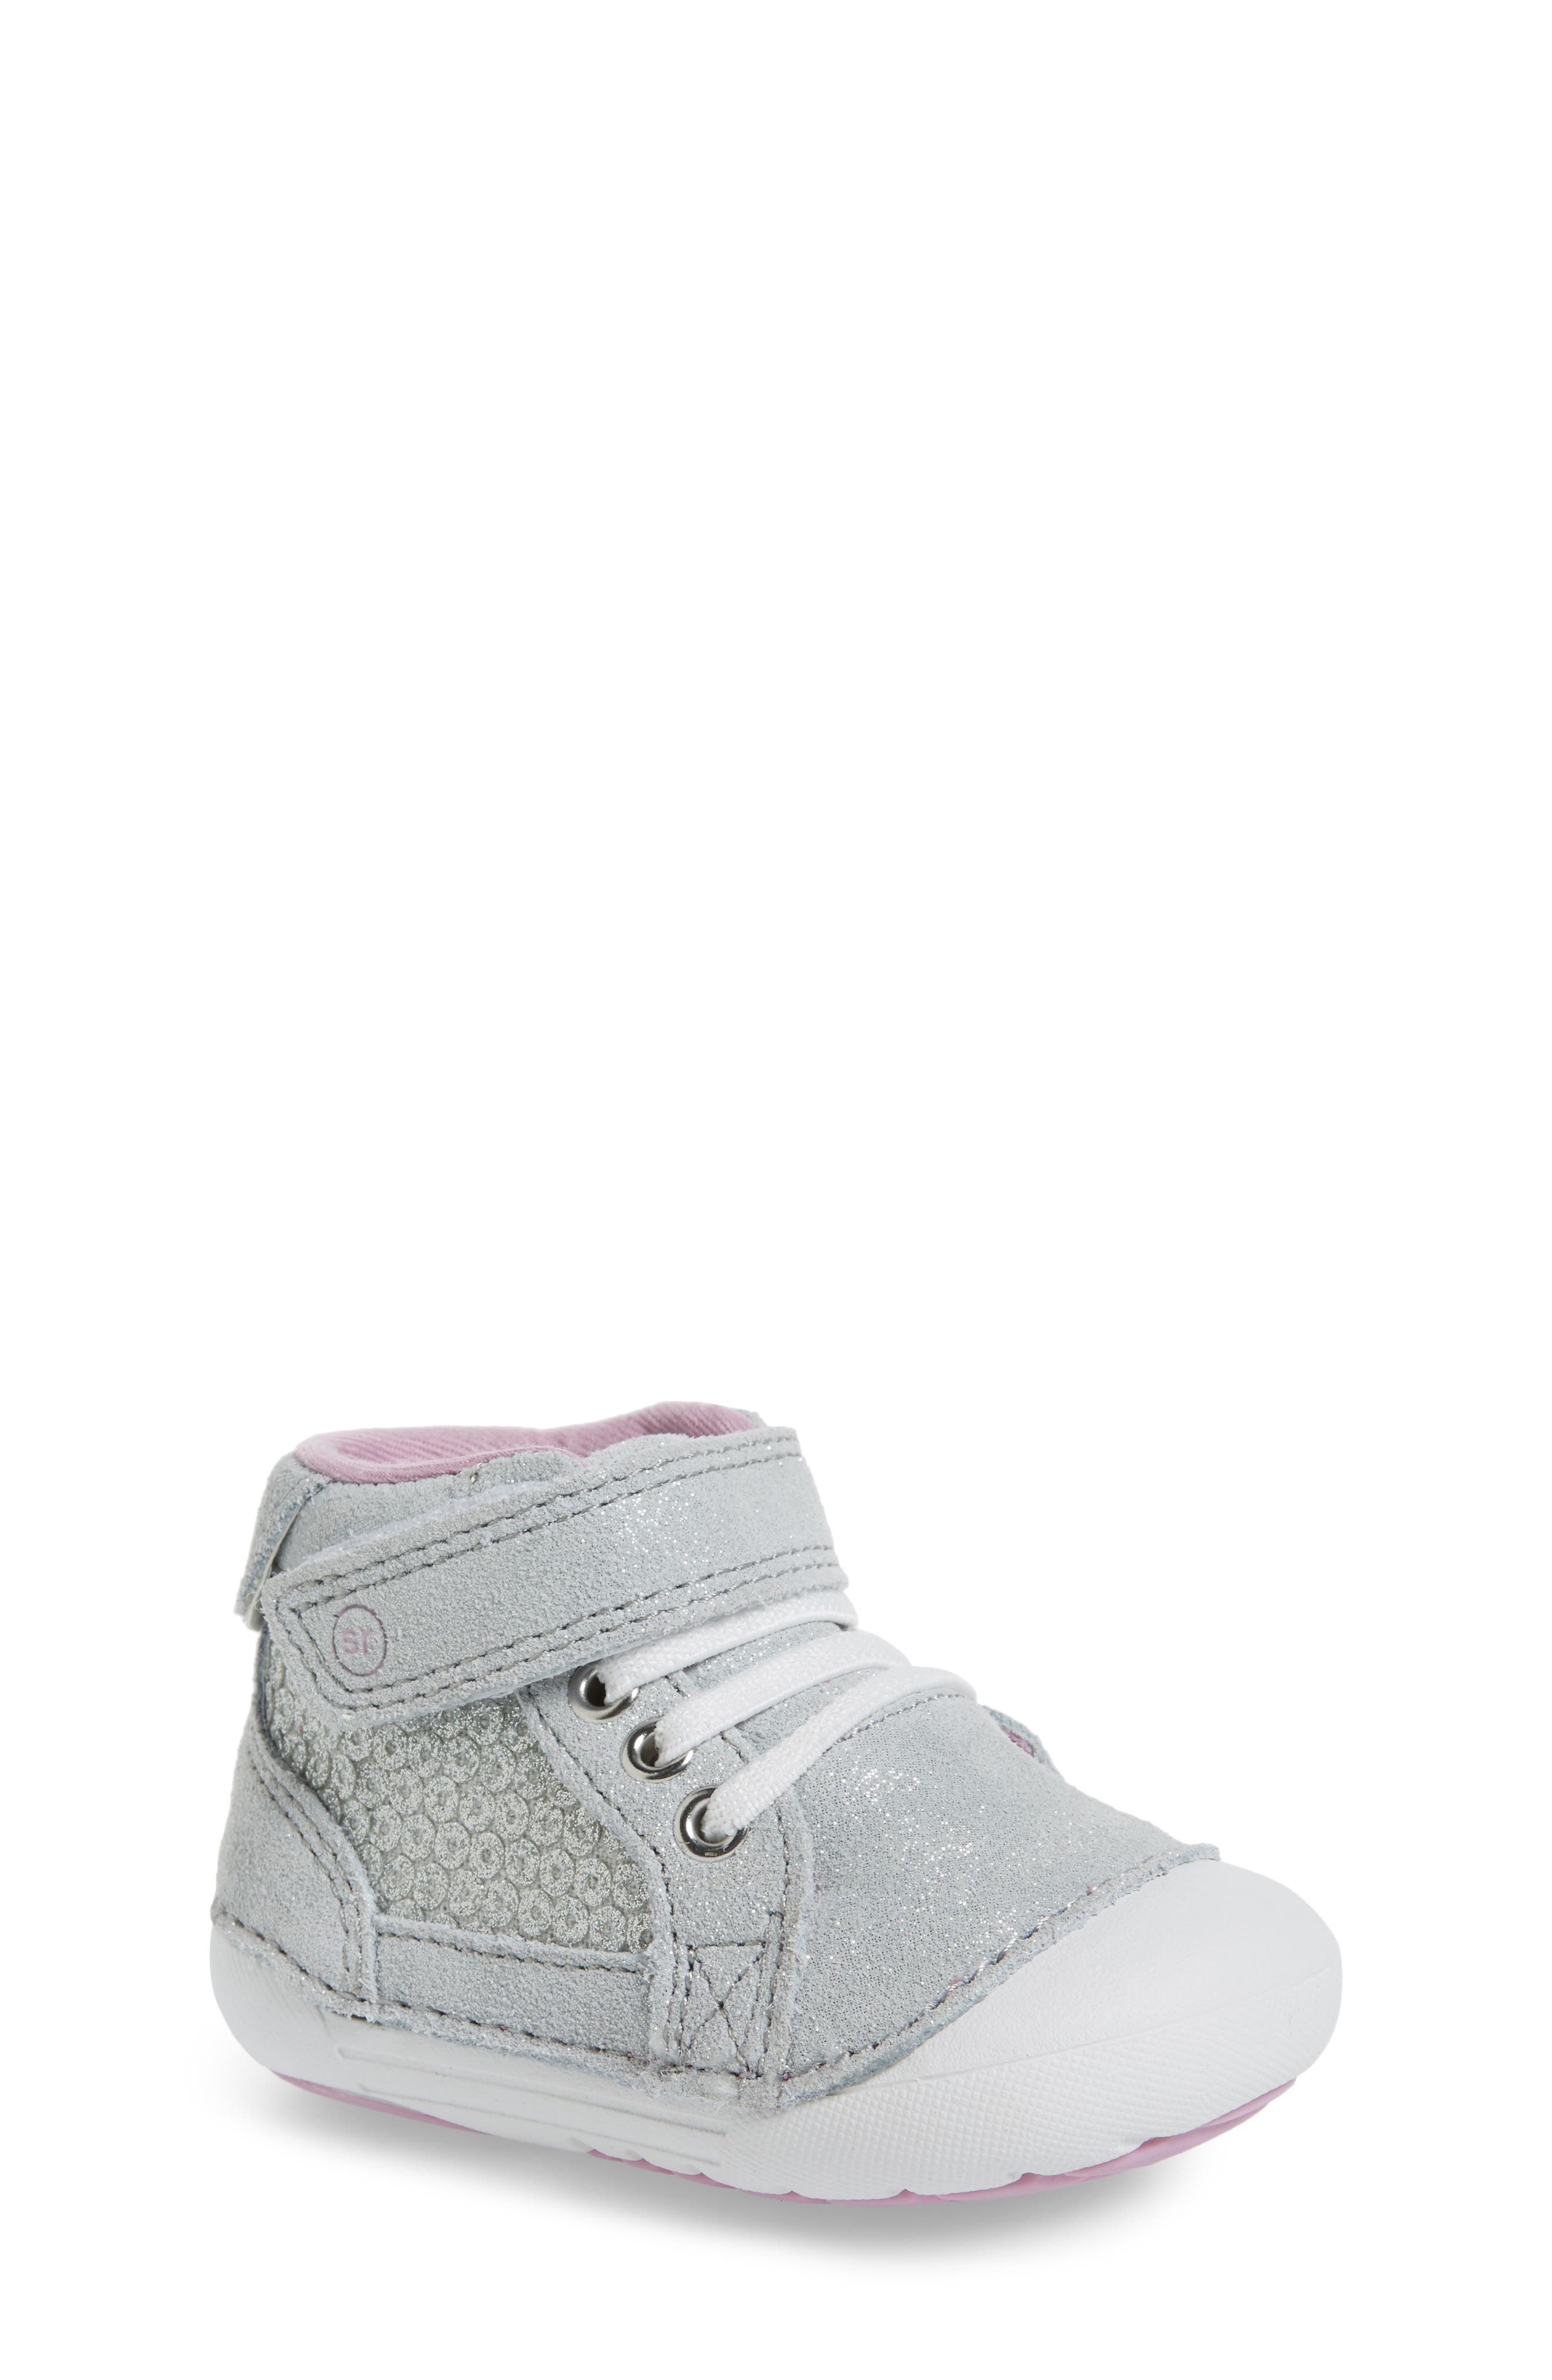 stride rite high top baby shoes